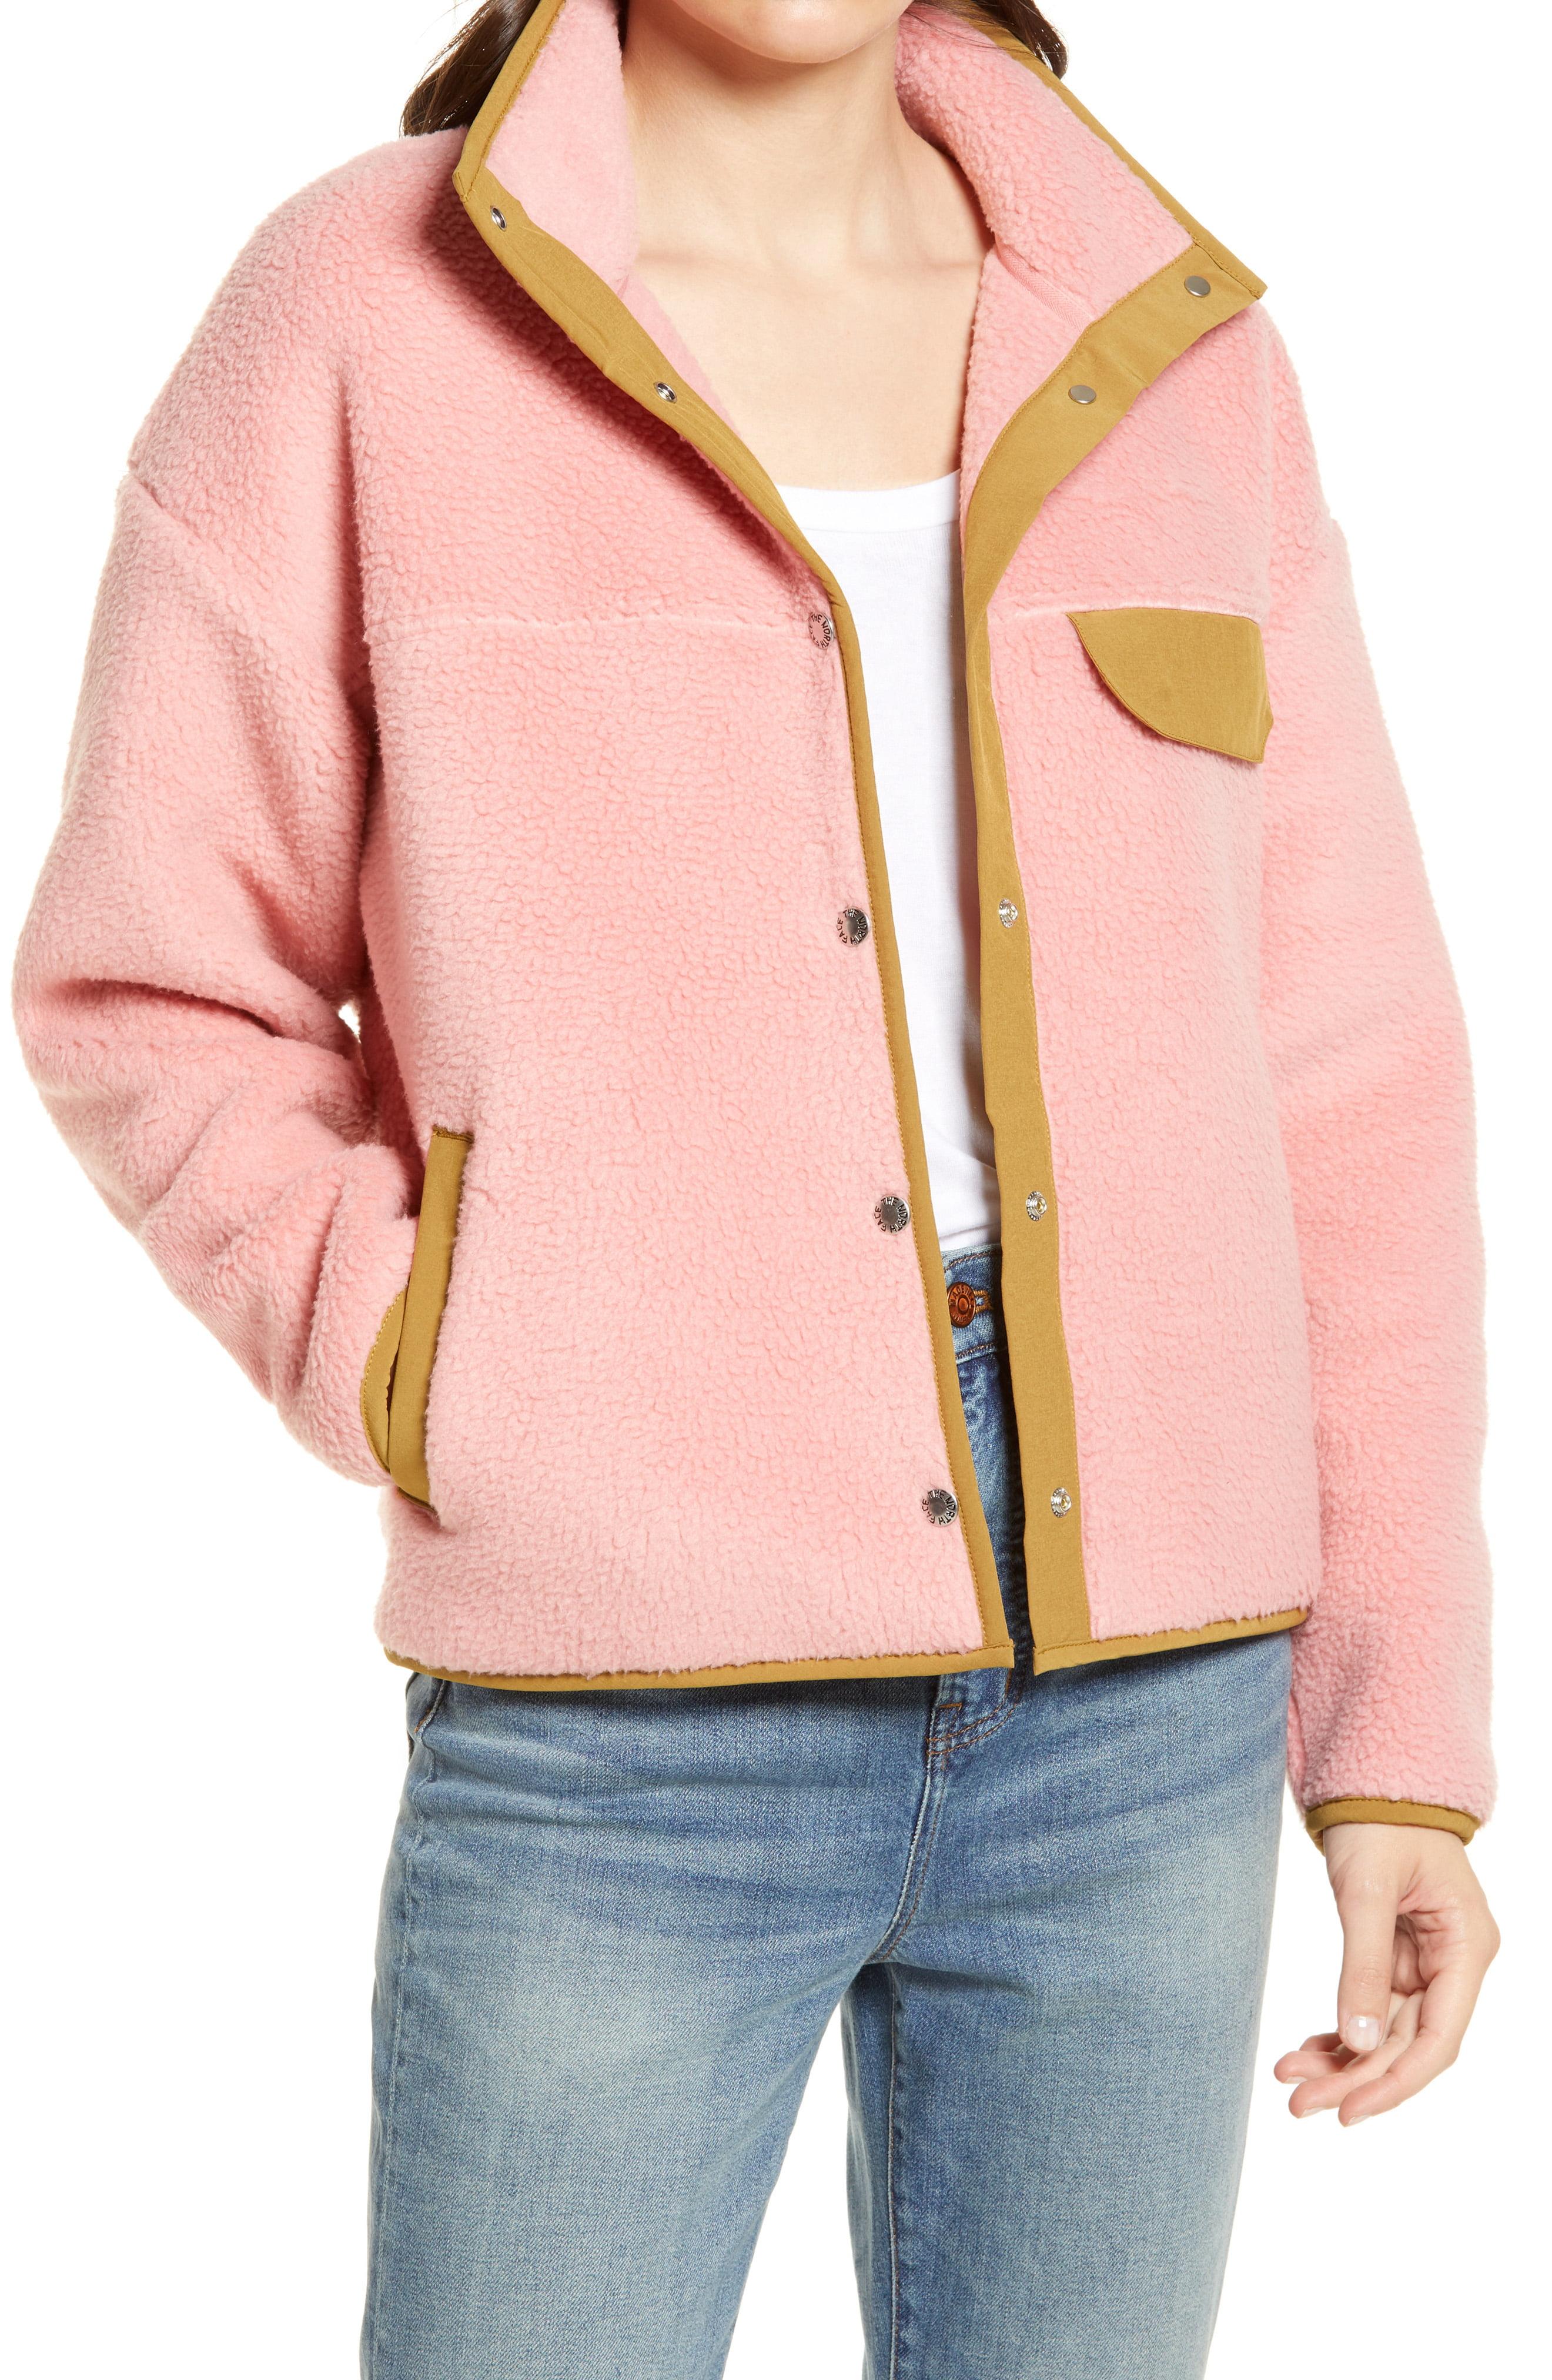 The North Face Cragmont Fleece Jacket in Pink - Lyst